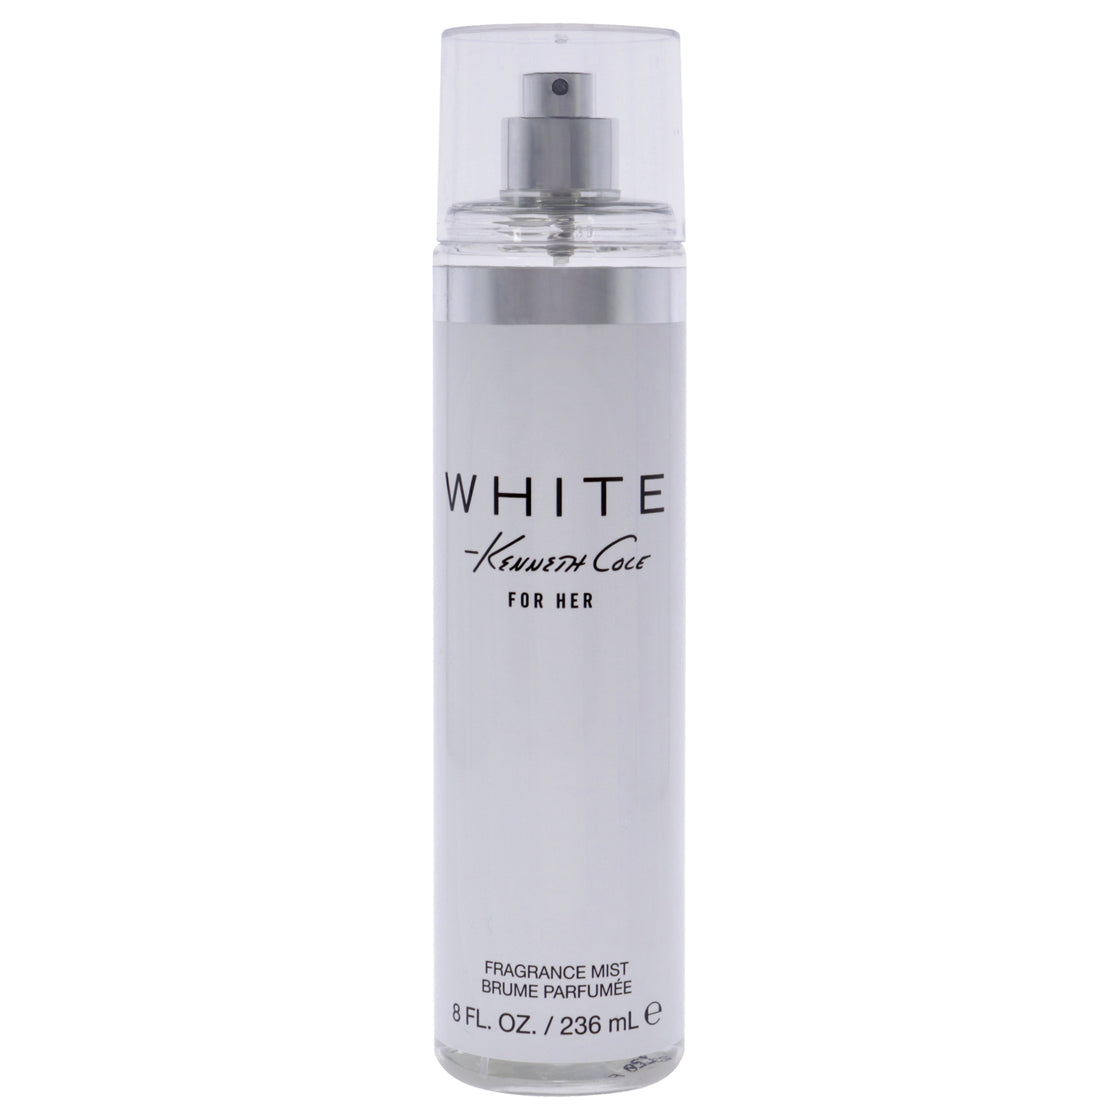 Kenneth Cole White by Kenneth Cole for Women - 8 oz Fragrance Mist